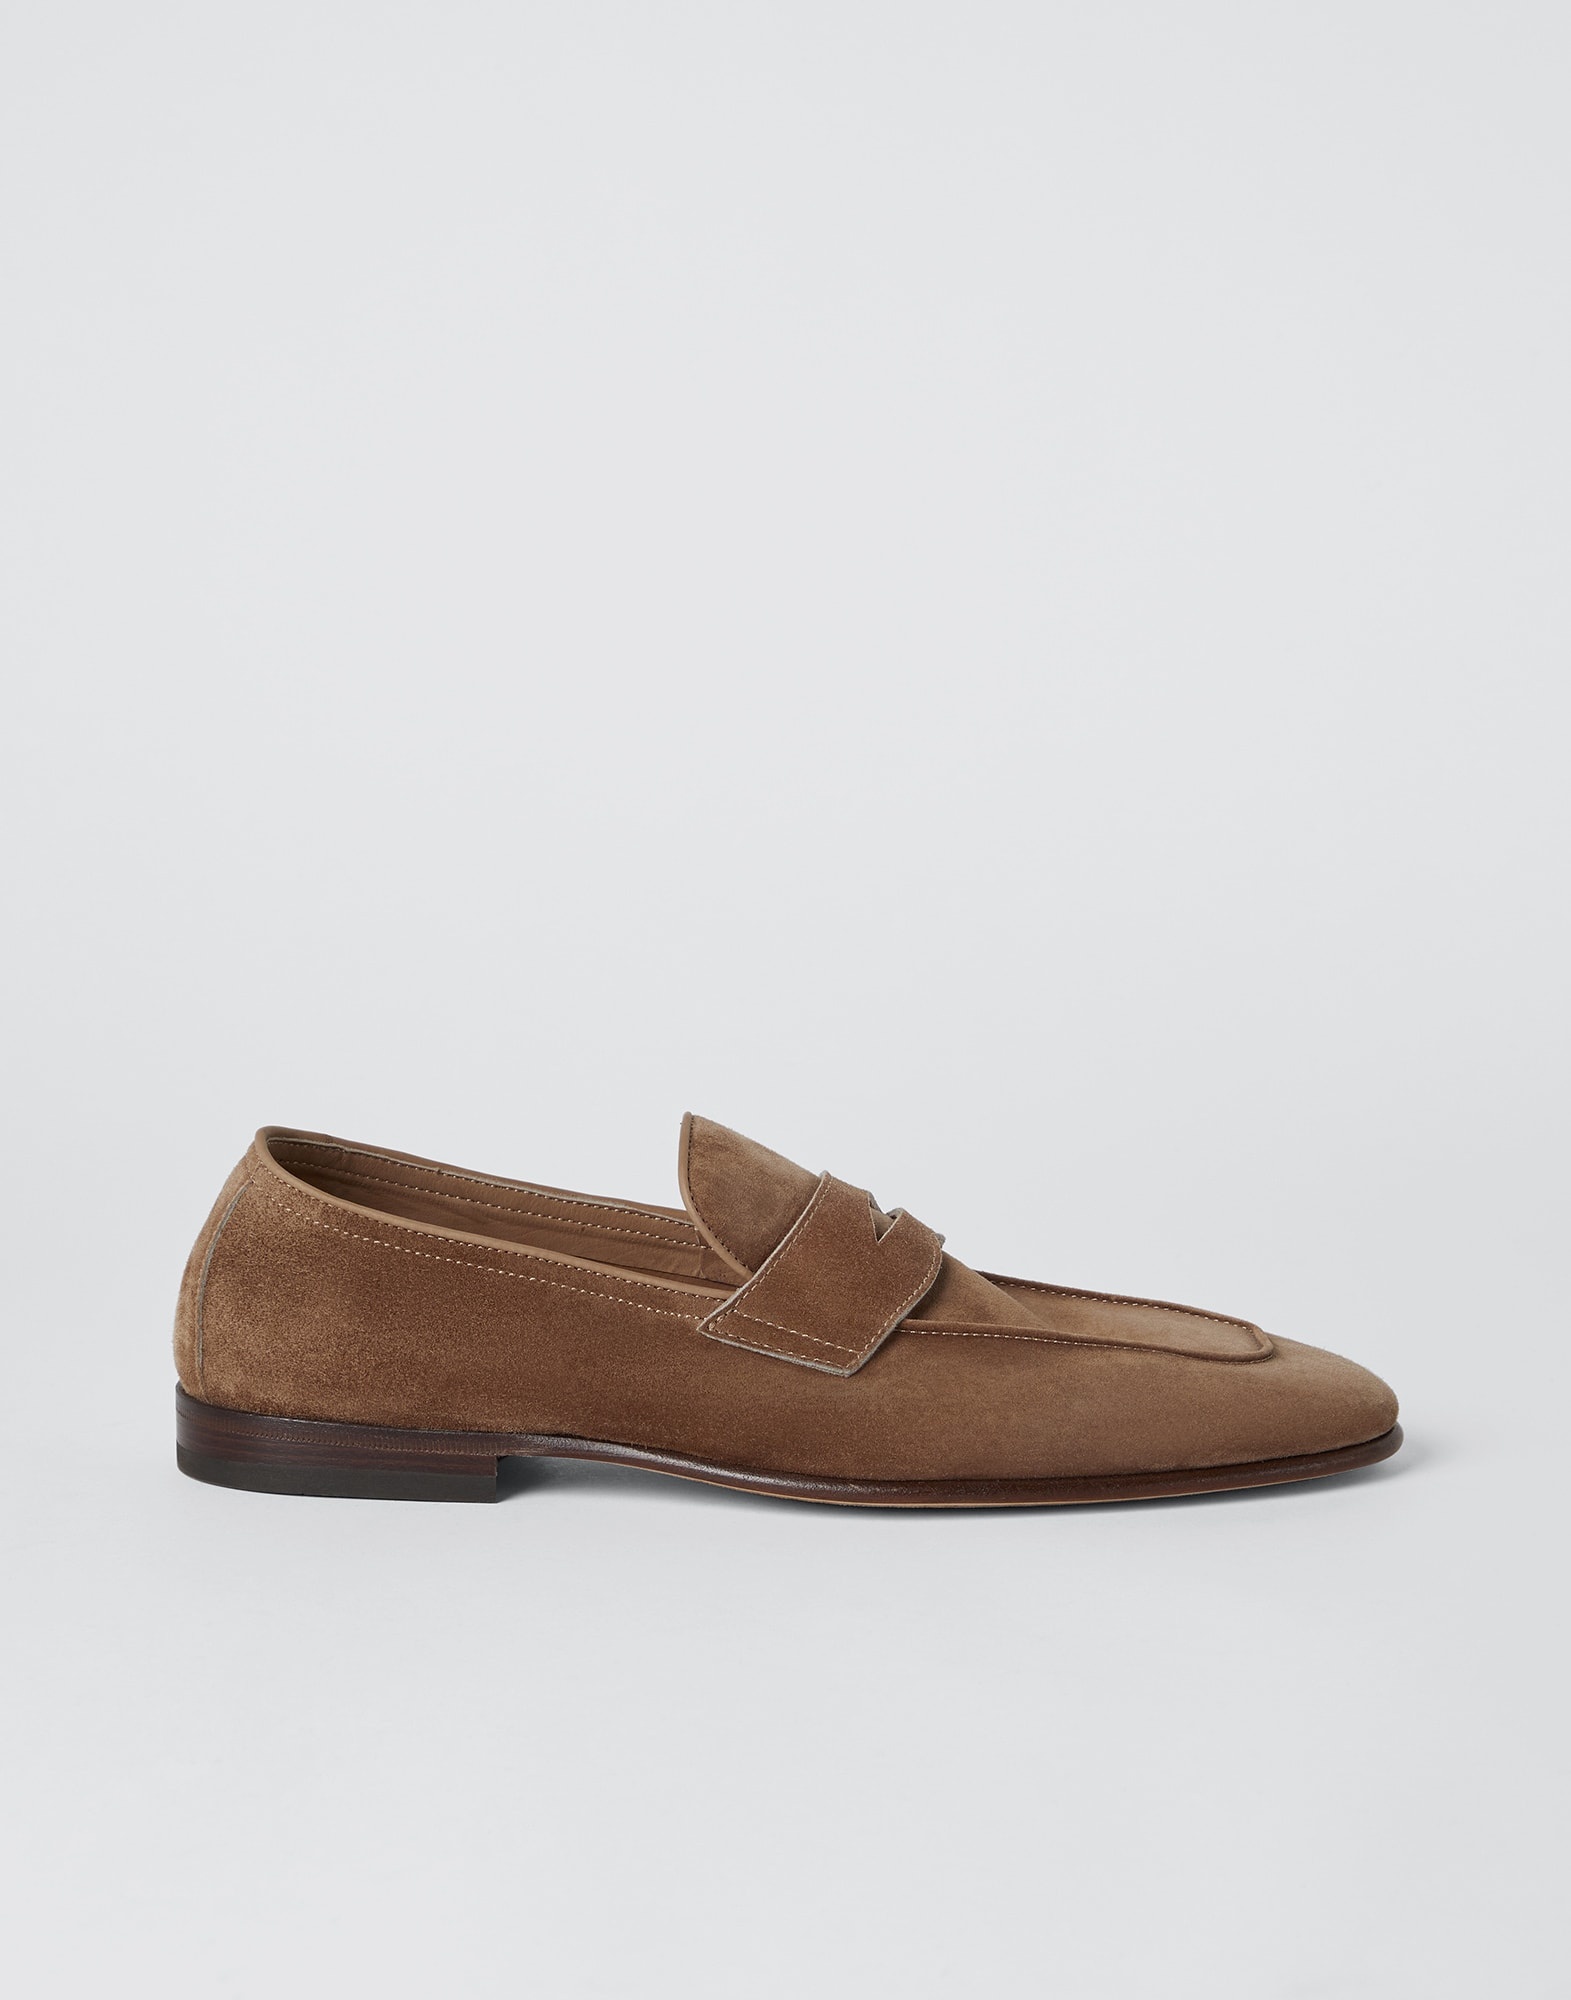 Suede unlined penny loafers - 5